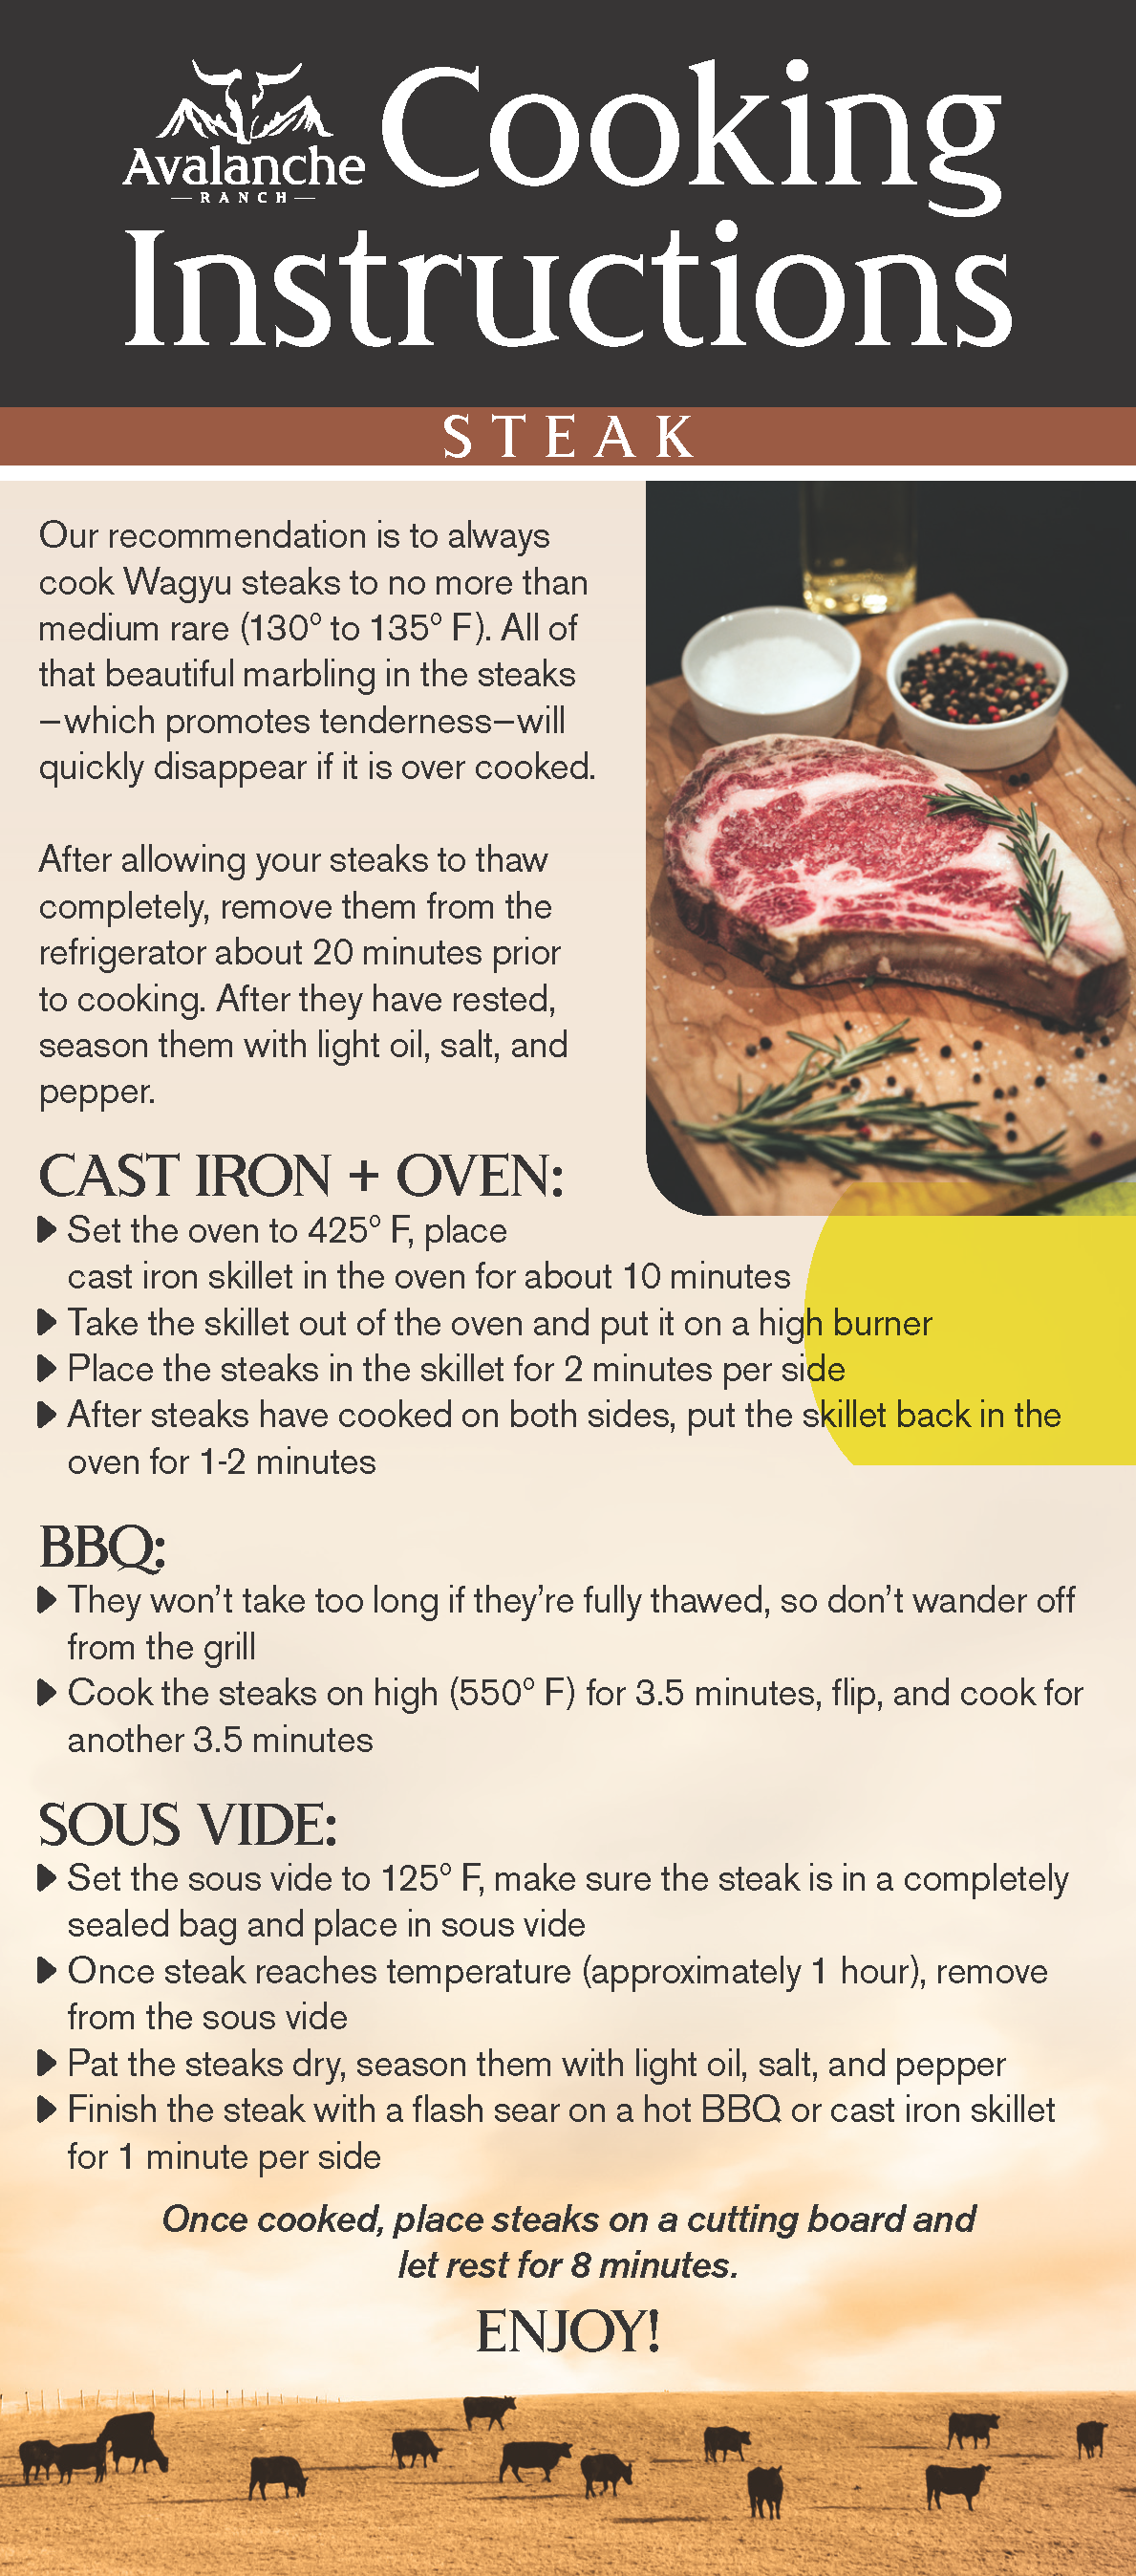 HOW TO COOK WAGYU STEAK